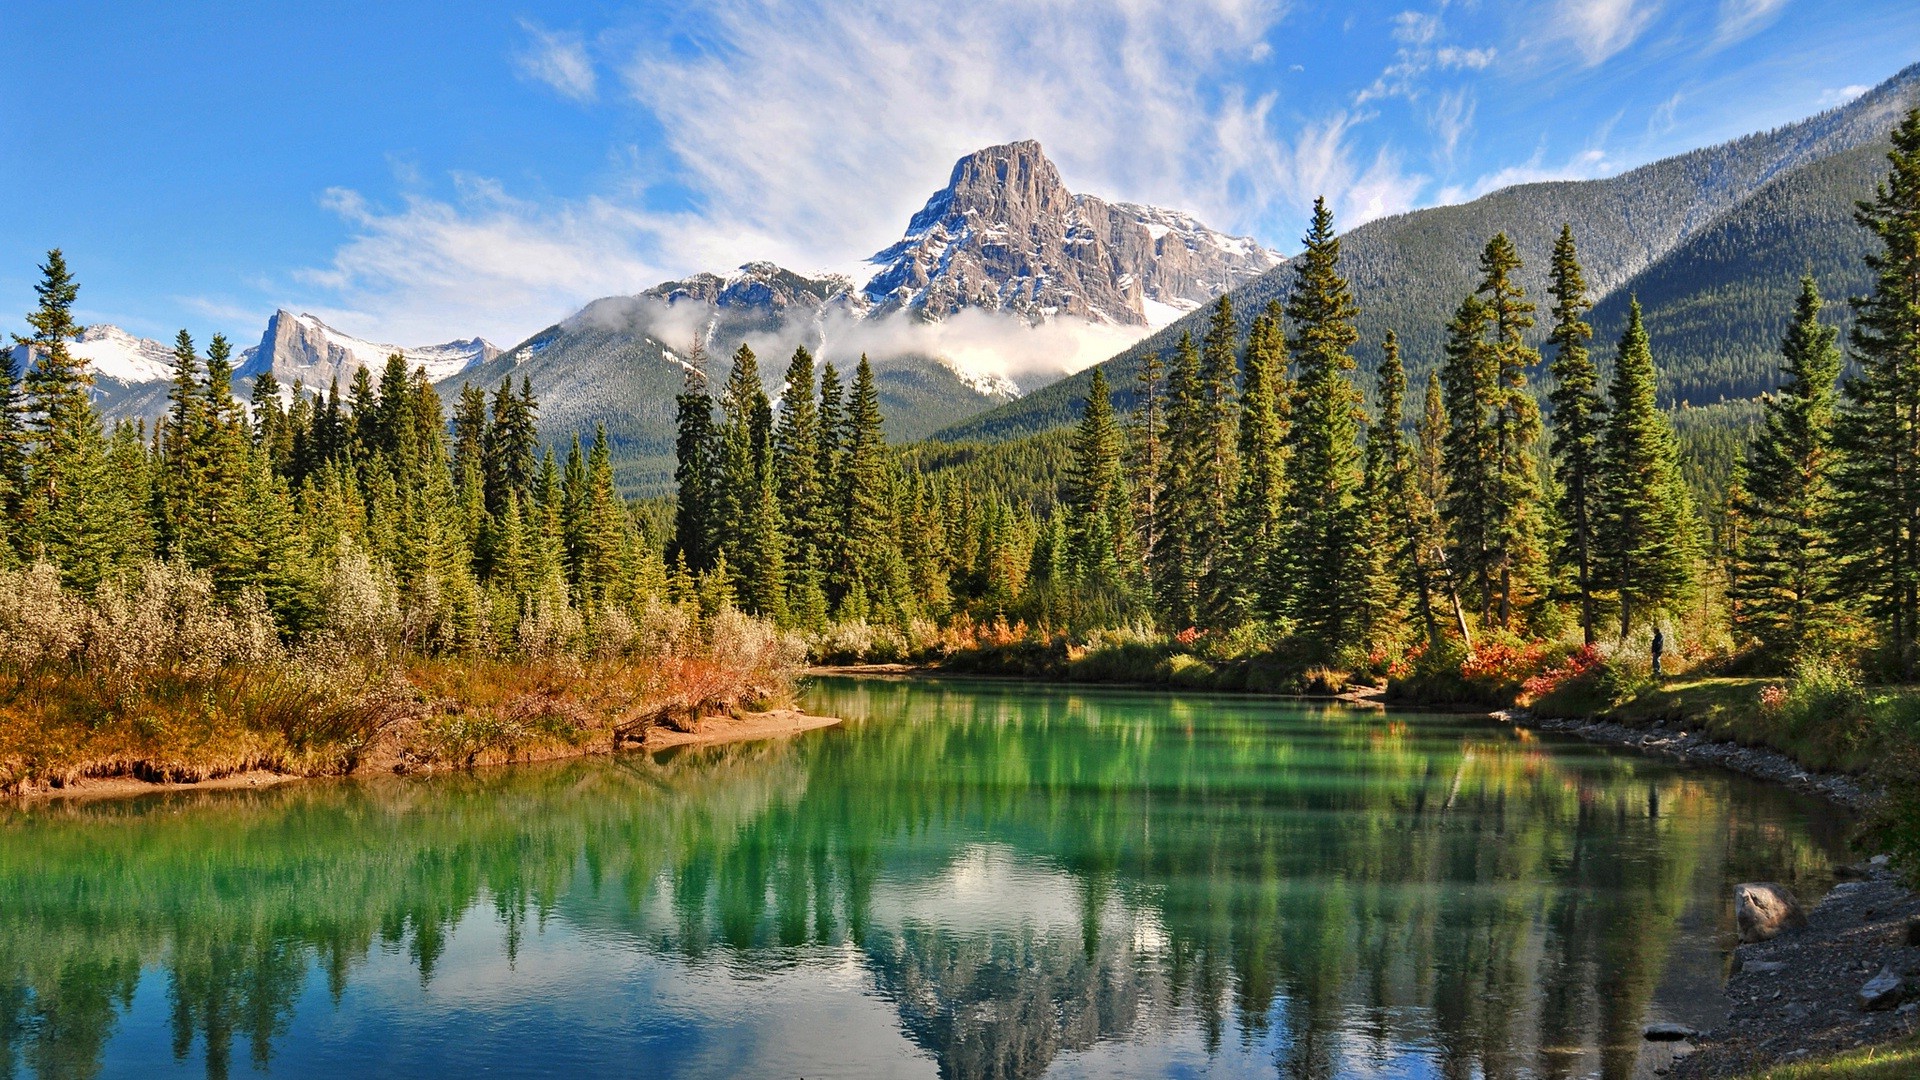 lake, Forest, Mountain, Canada, Summer, Snowy Peak, Green, Grass, Water, Clouds, Nature, Landscape Wallpaper